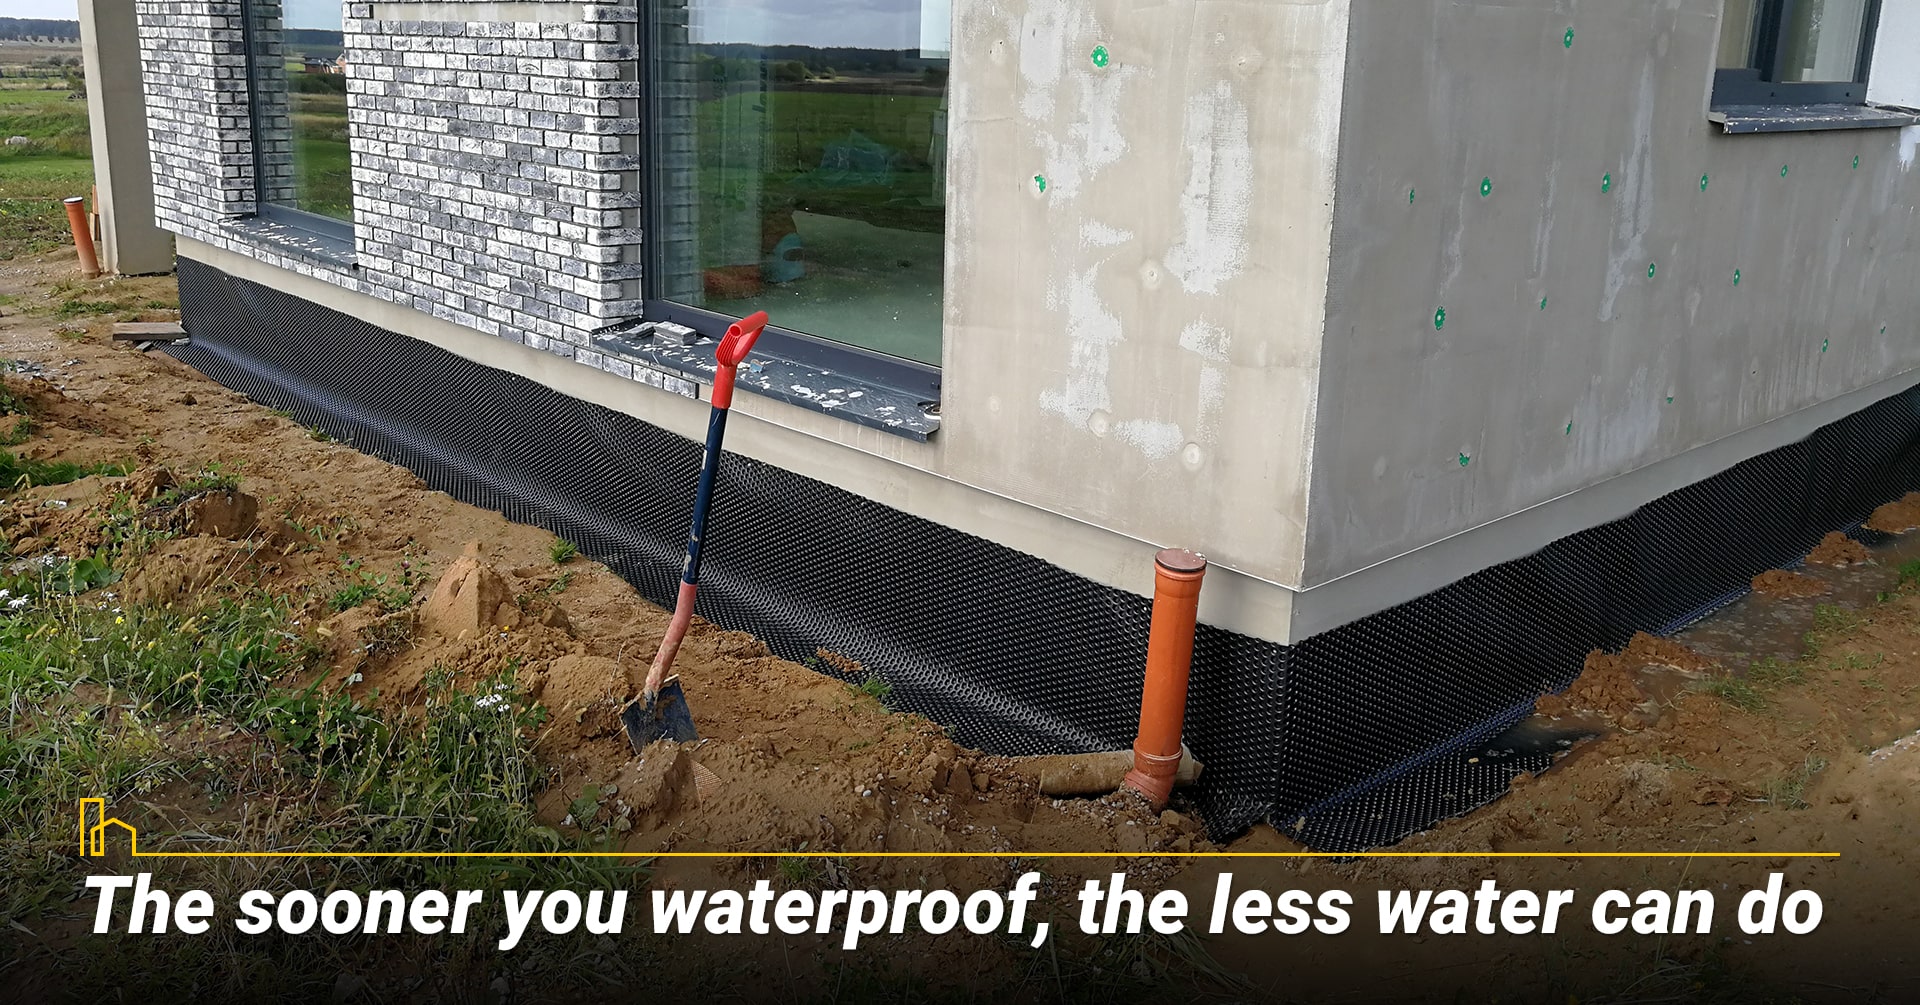 The sooner you waterproof, the less water can do.